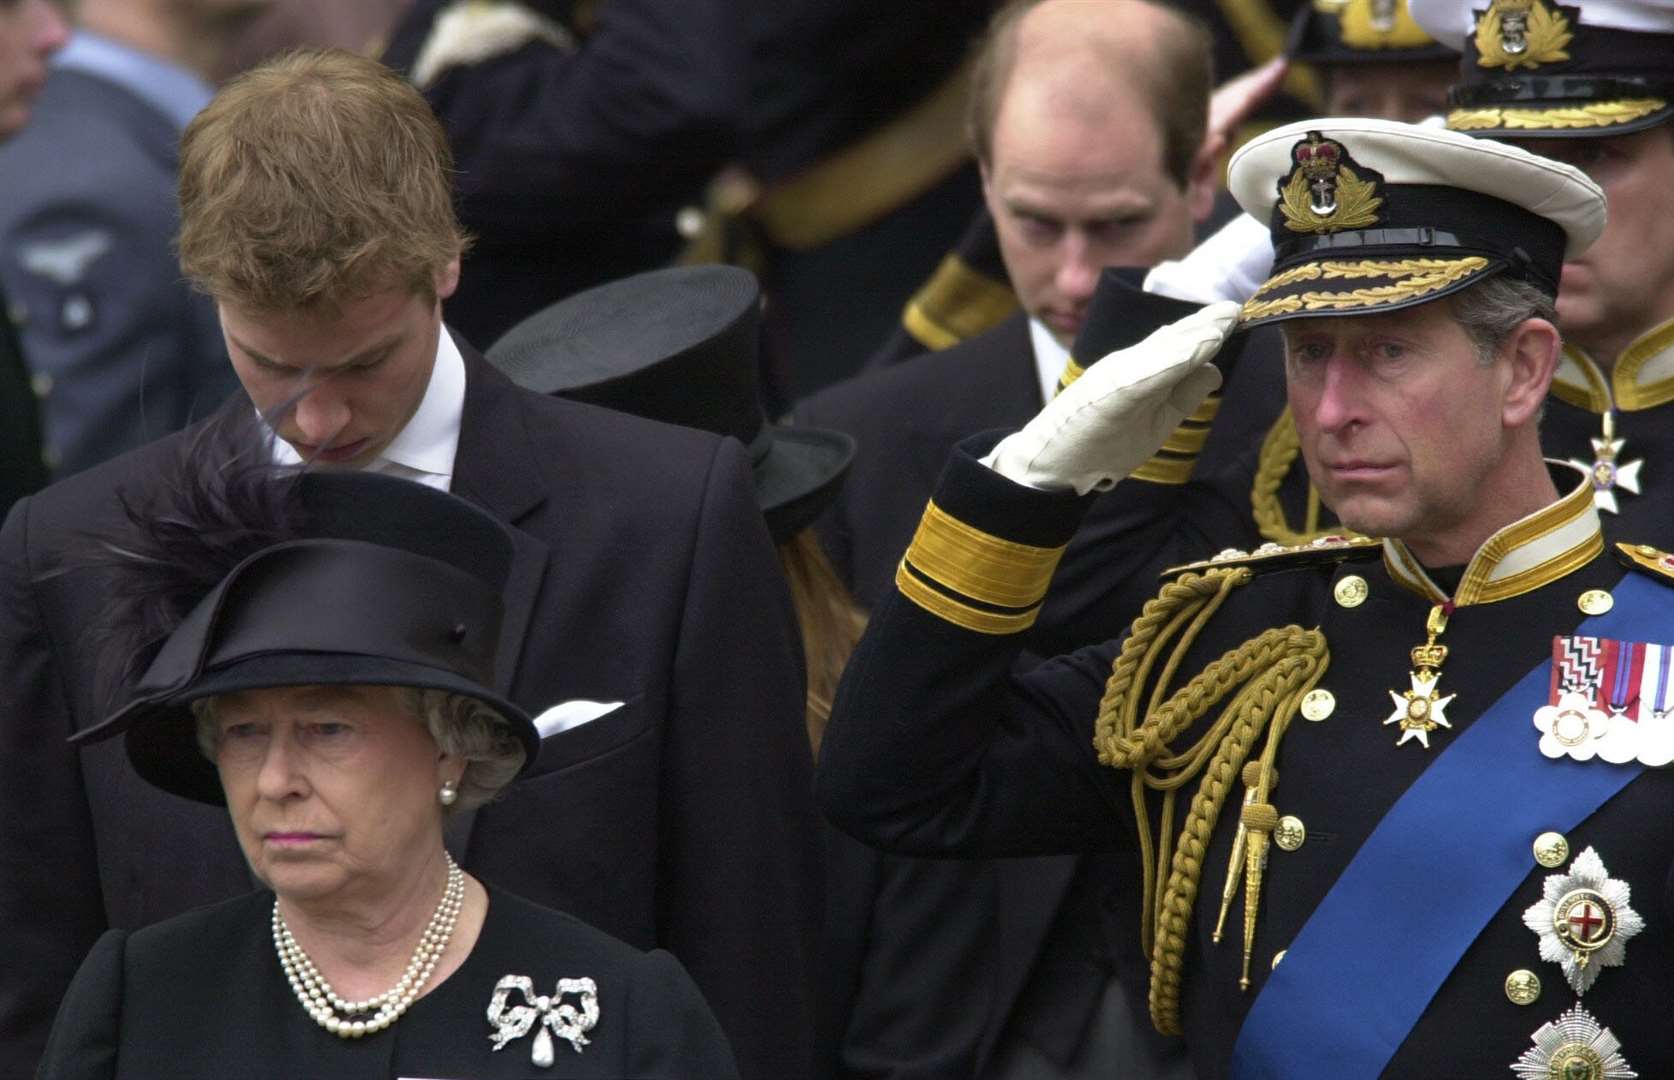 The Queen, with the Prince of Wales, Prince William and the Earl of Wessex after the Queen Mother’s funeral (Toby Melville/PA)